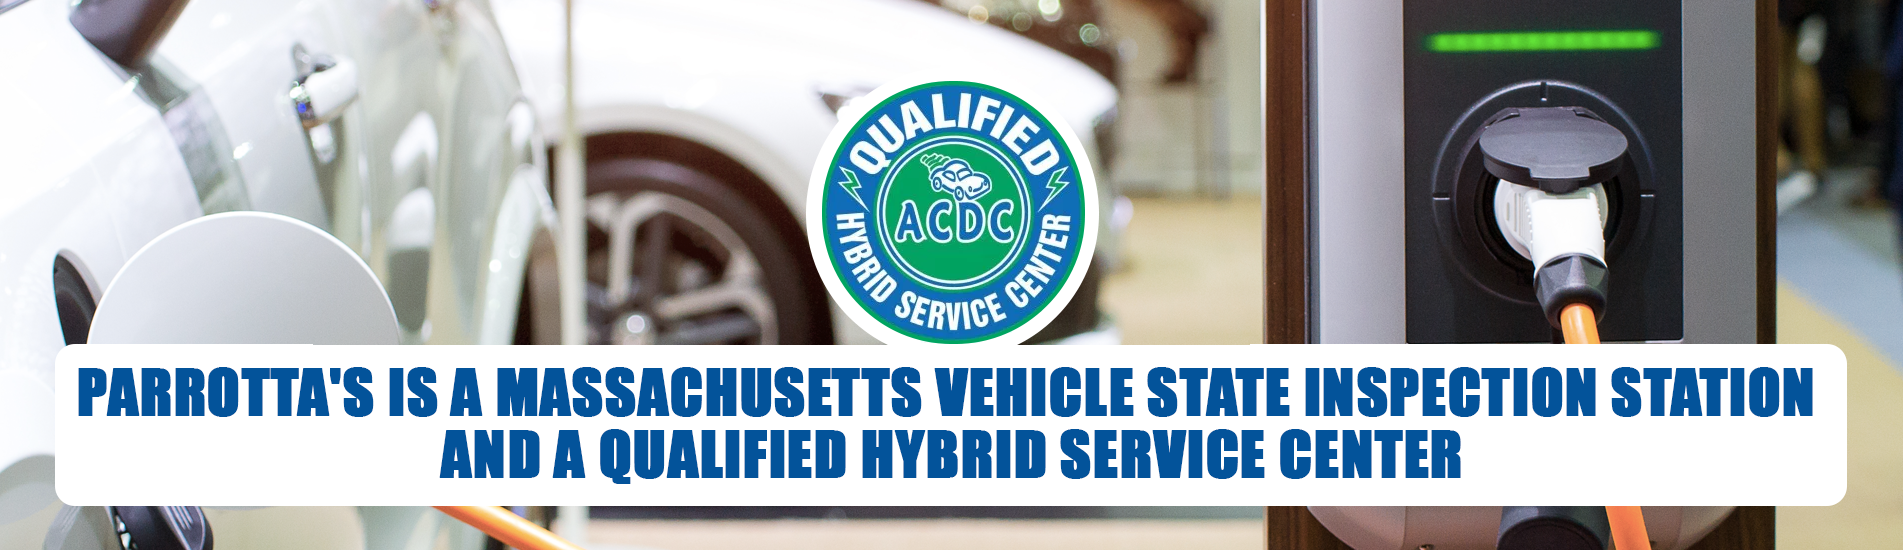 Parrotta's is a massachusetts vehicle state inspection station and a qualified hybrid service center 